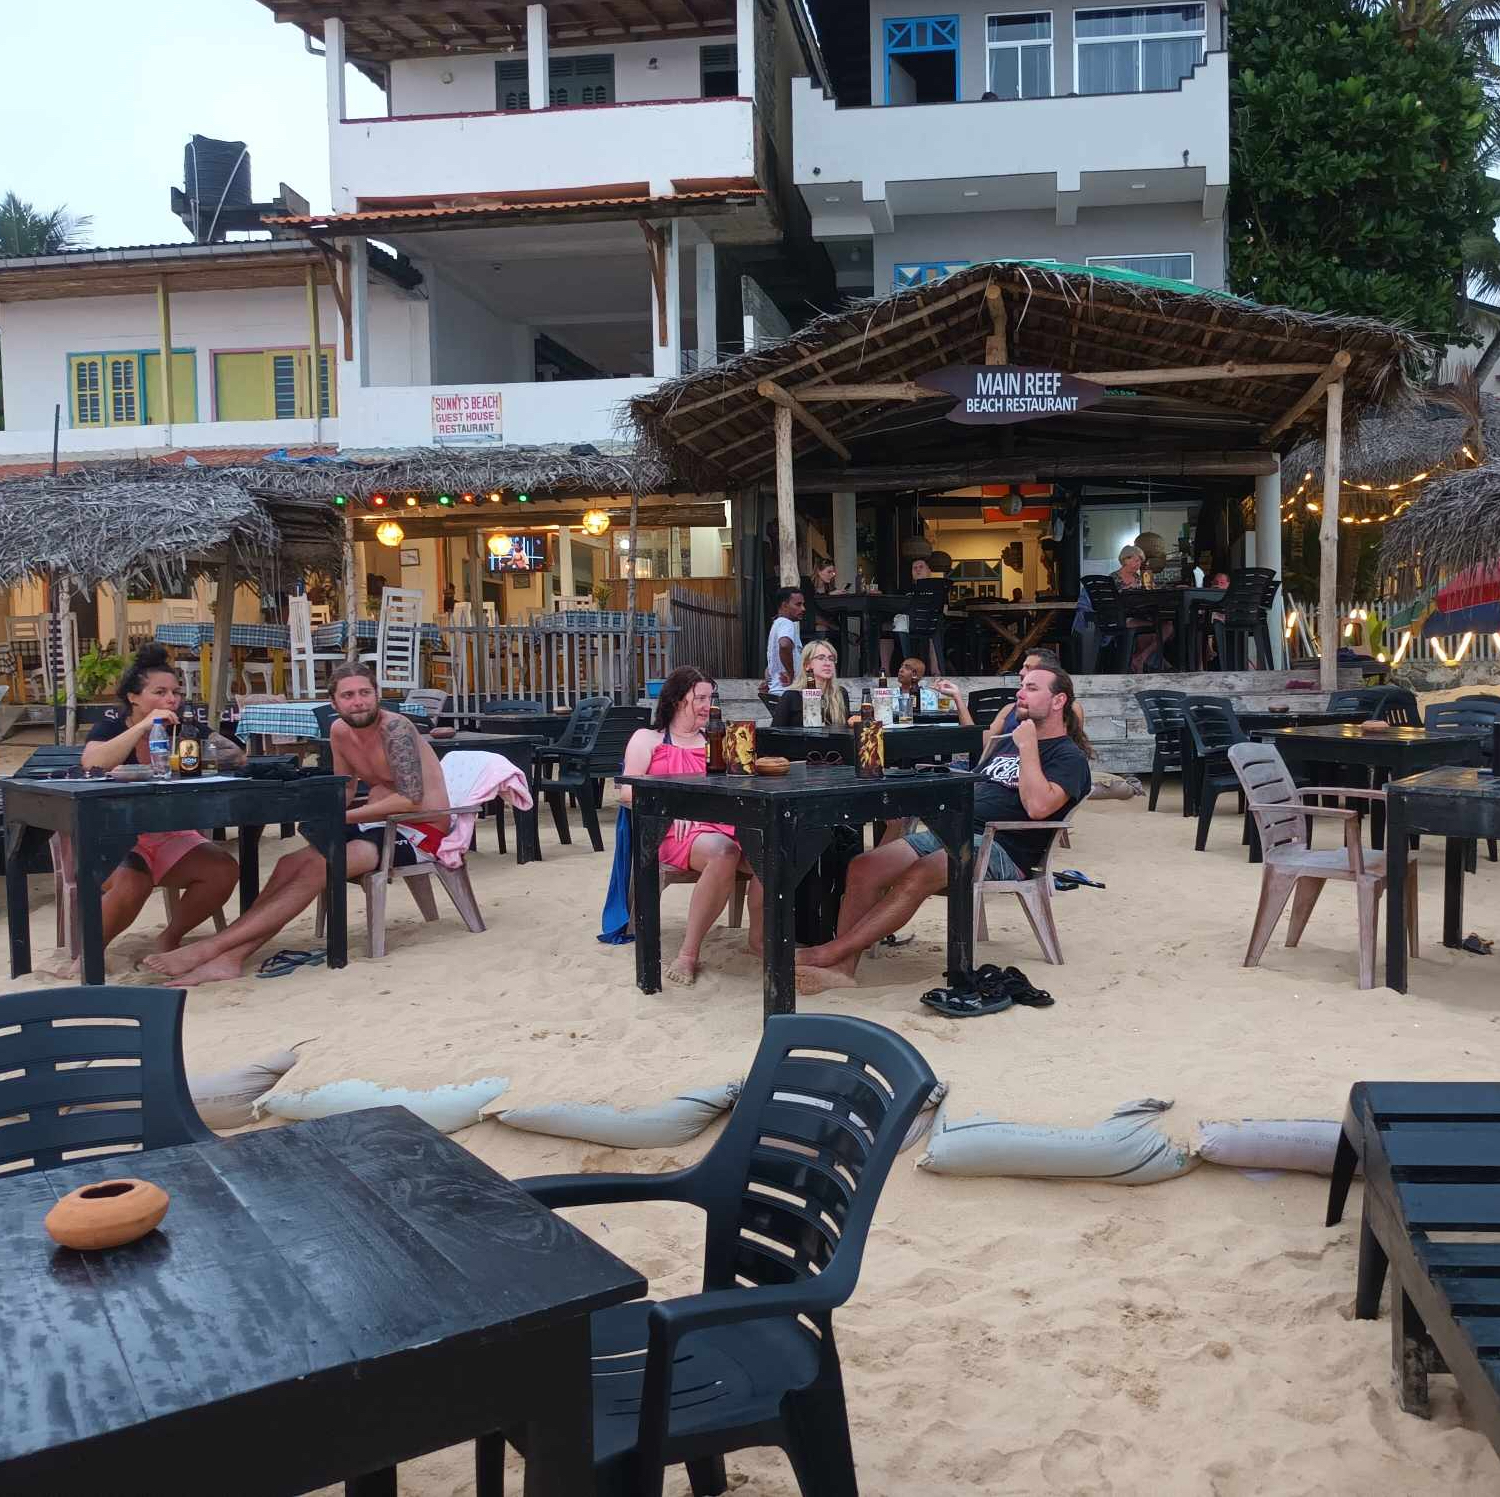 A picture of restaurants on the beach with tables and guests sitting in front.